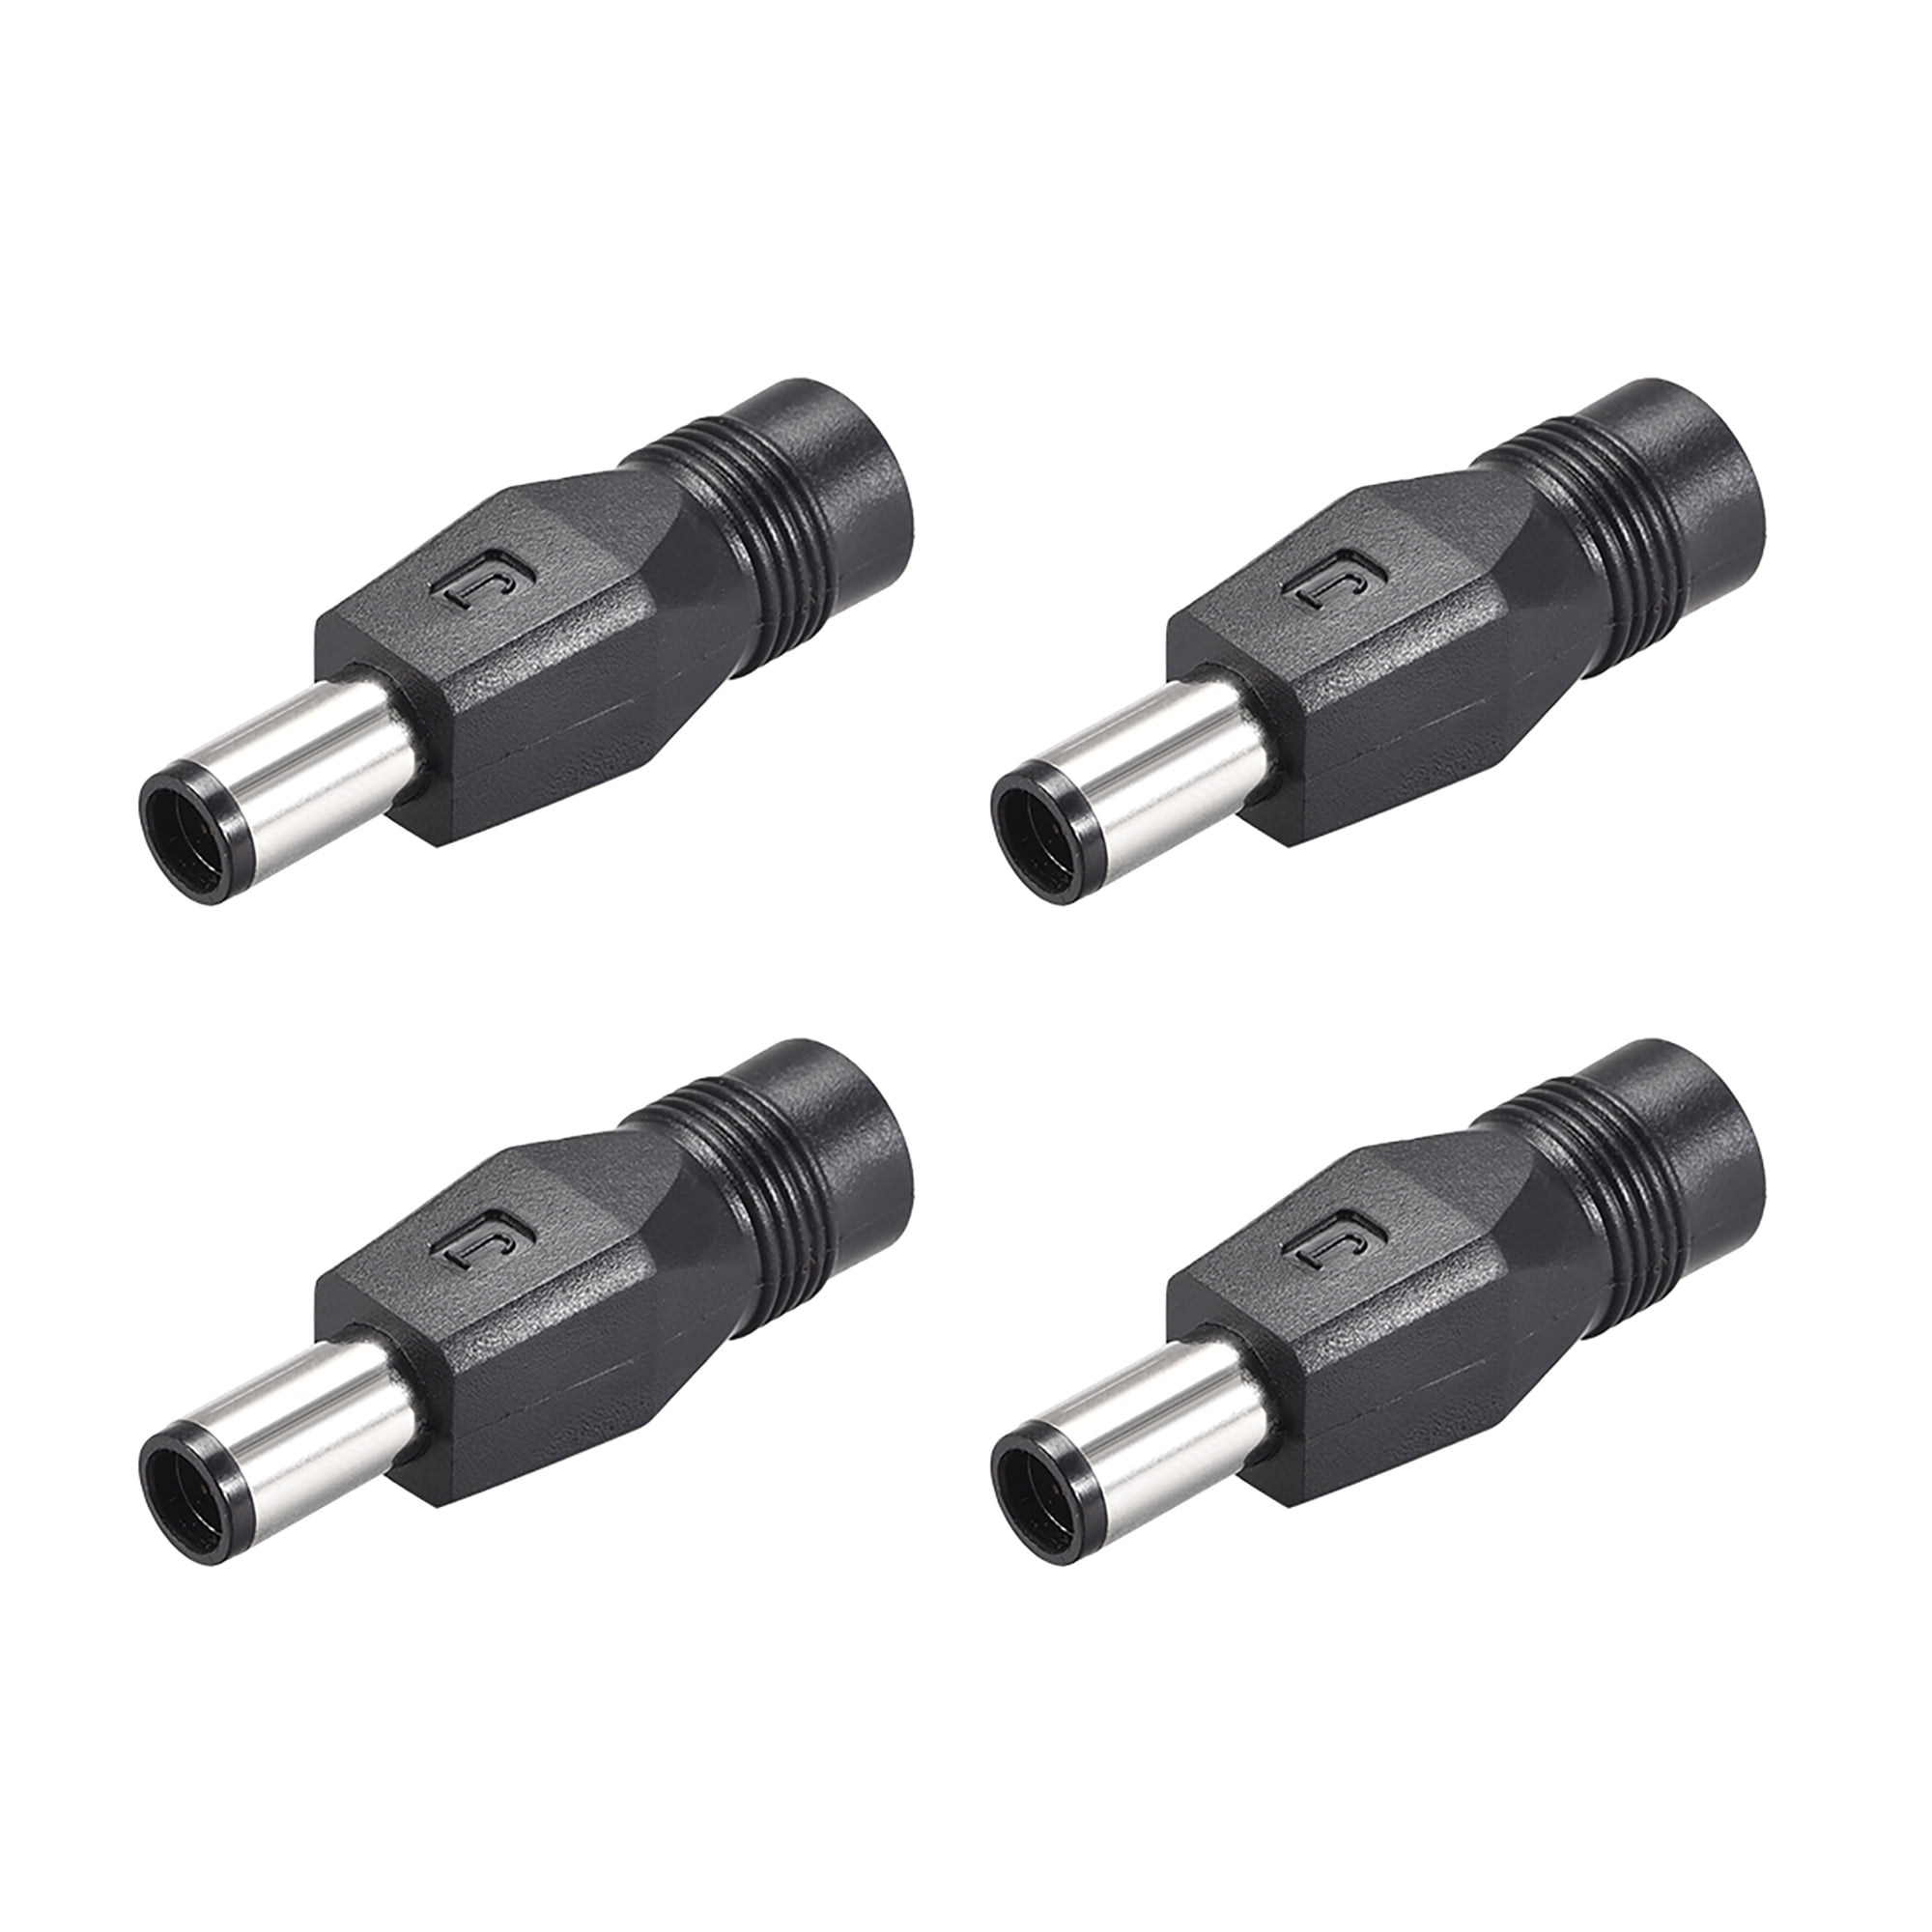 4PCS DC Power Female to Female Jack Adapter Connector 2.1 x 5.5mm LE 